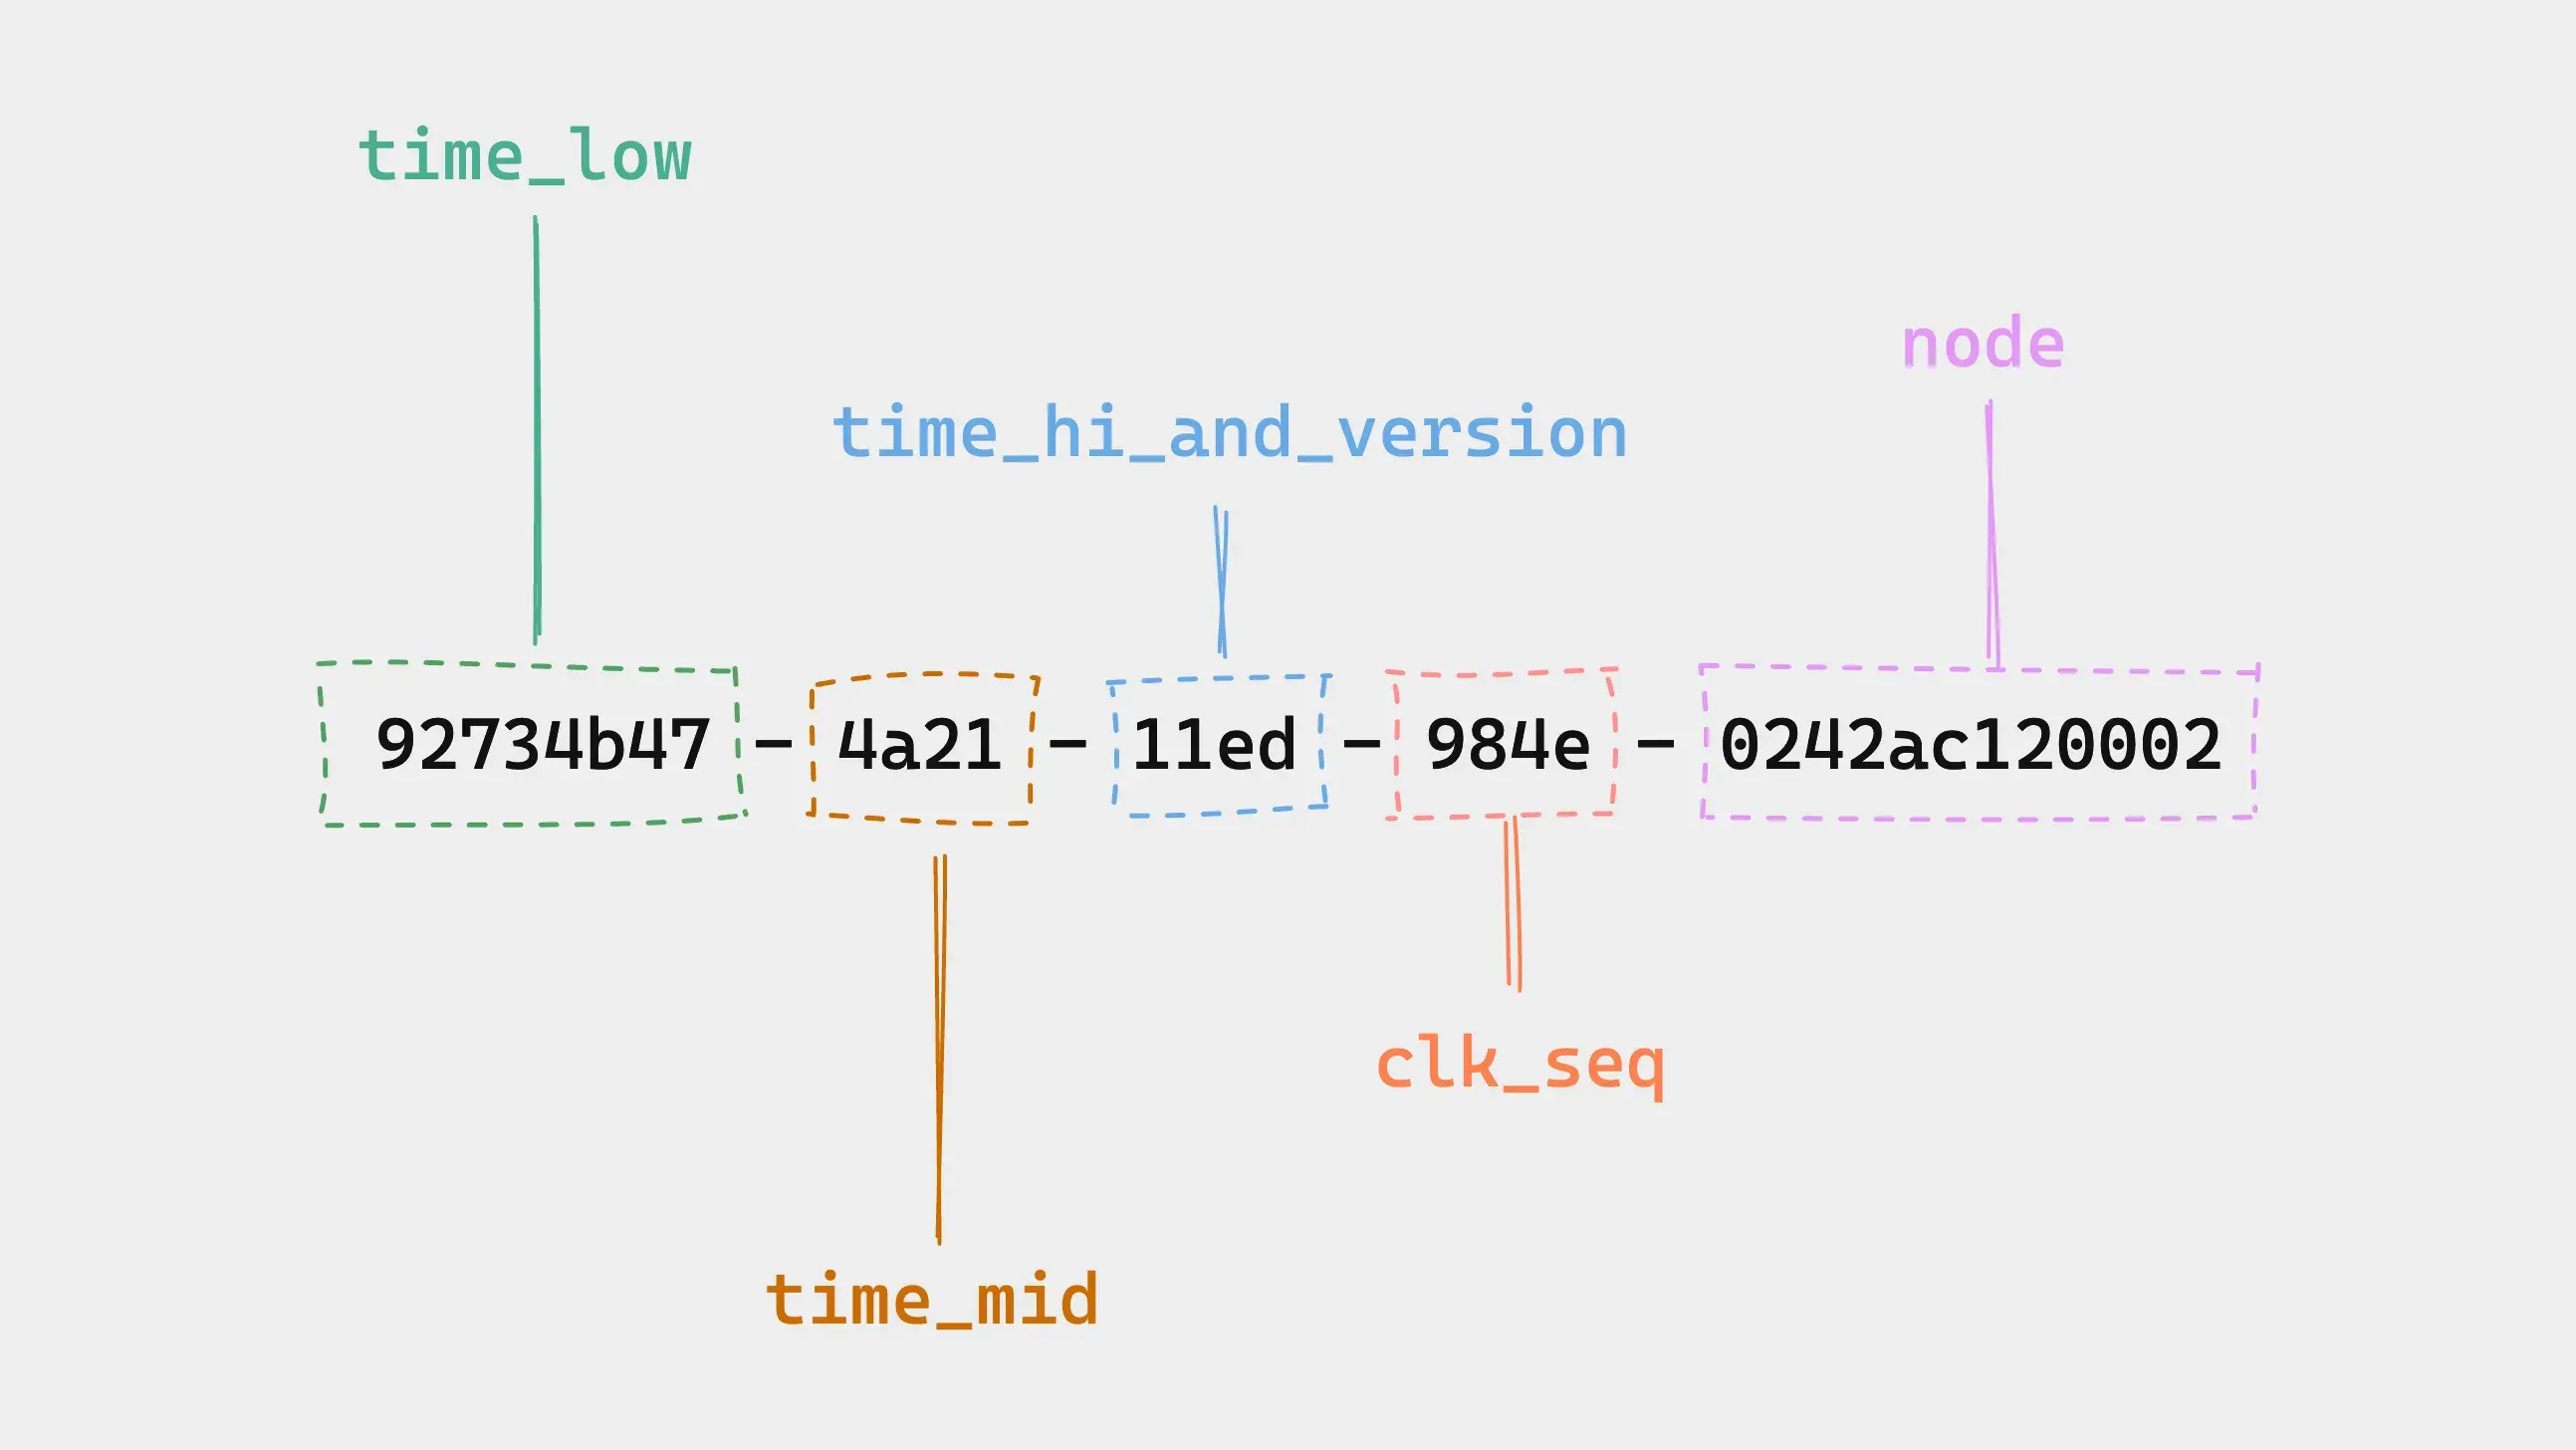 Diagram with annotated parts of a UUID